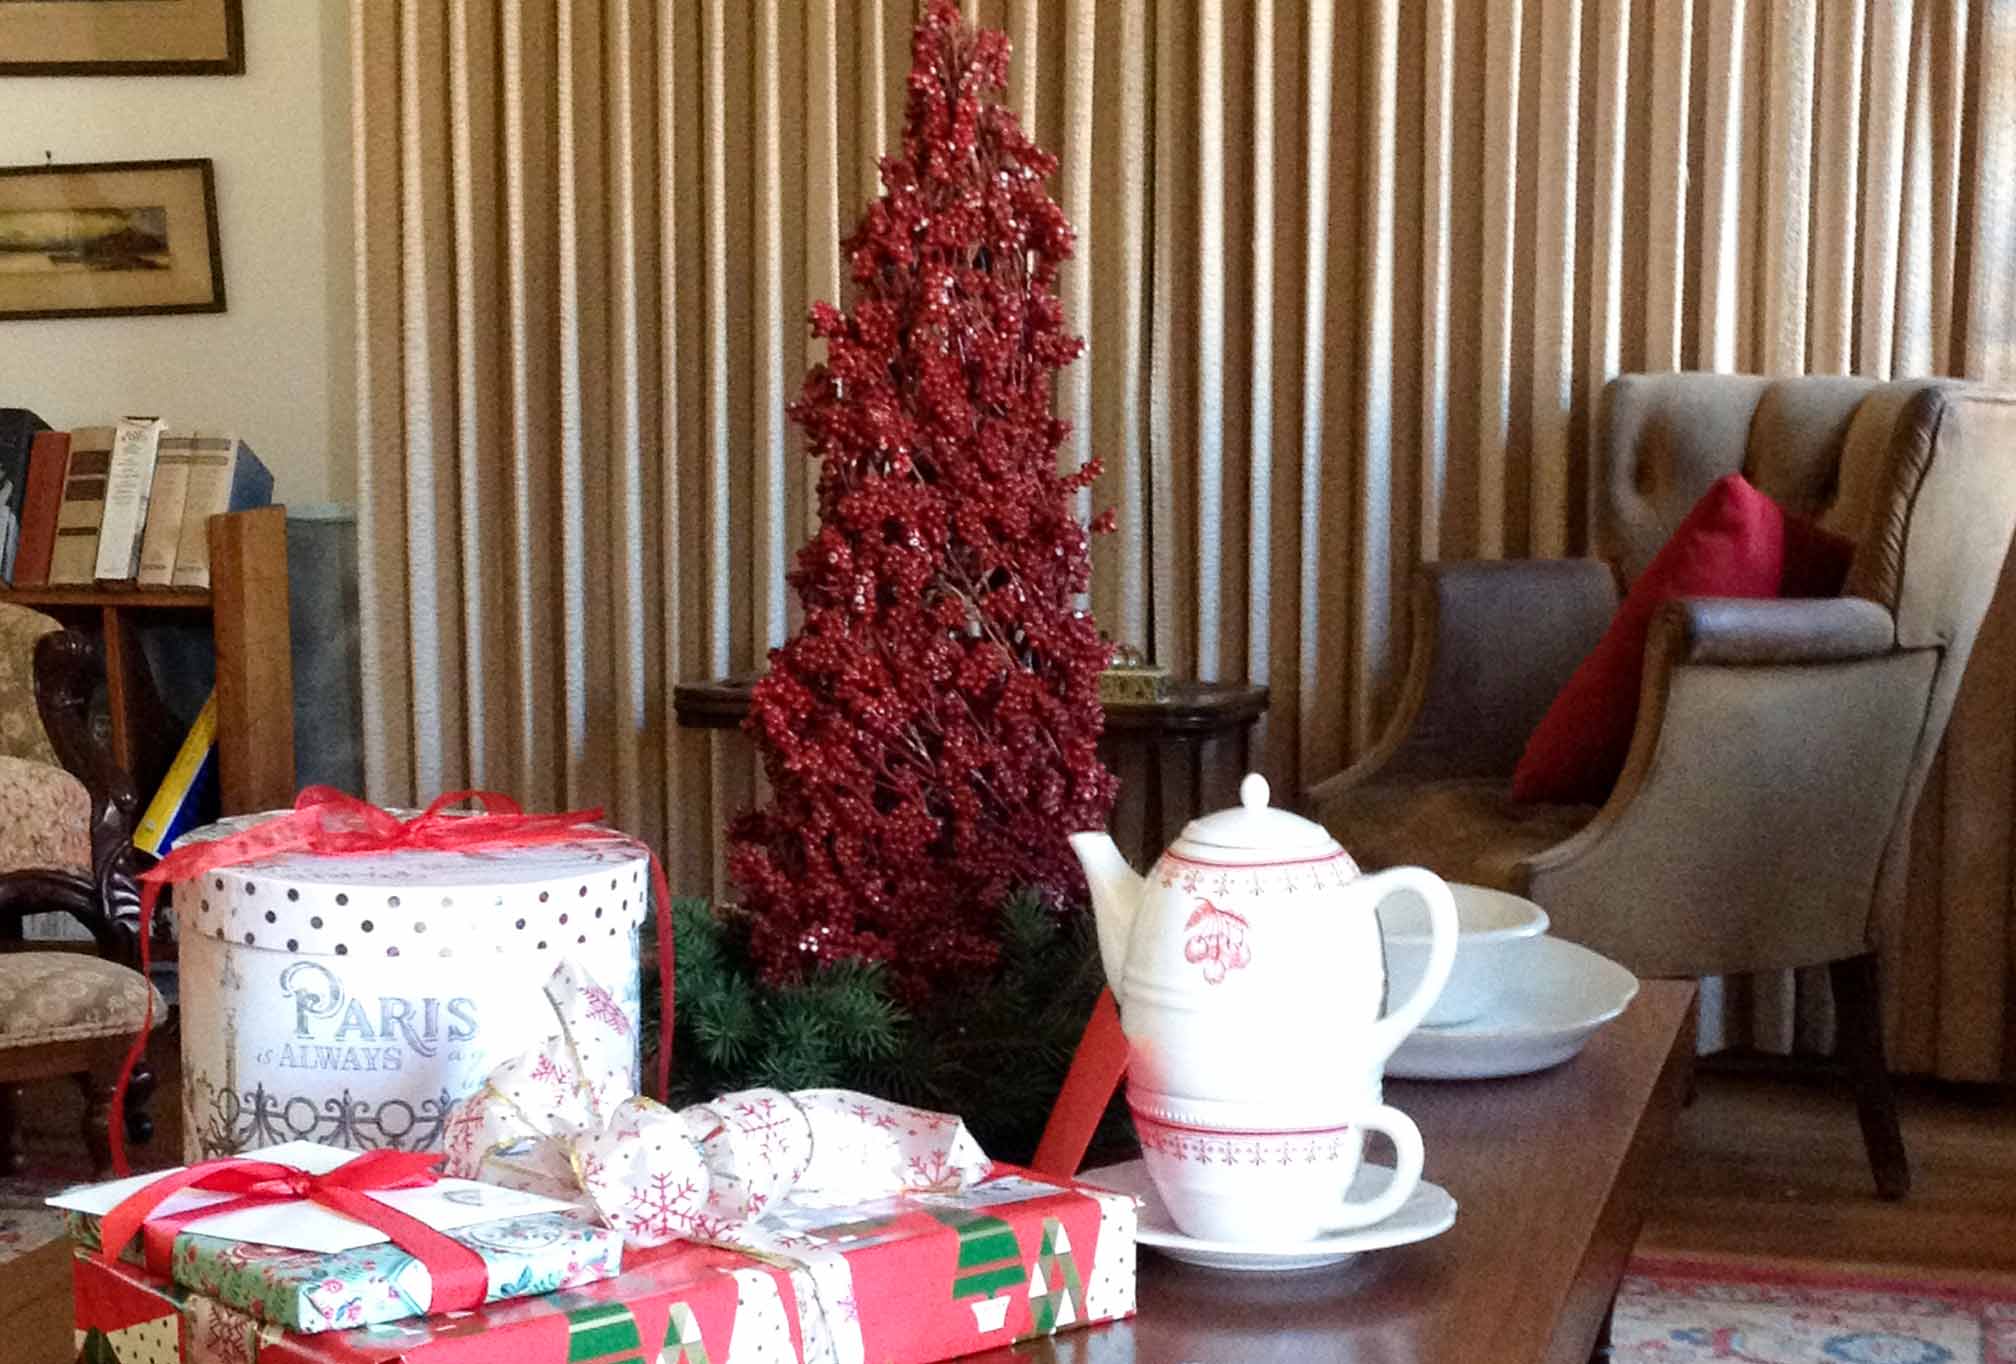 red Christmas tree on coffee table in living room